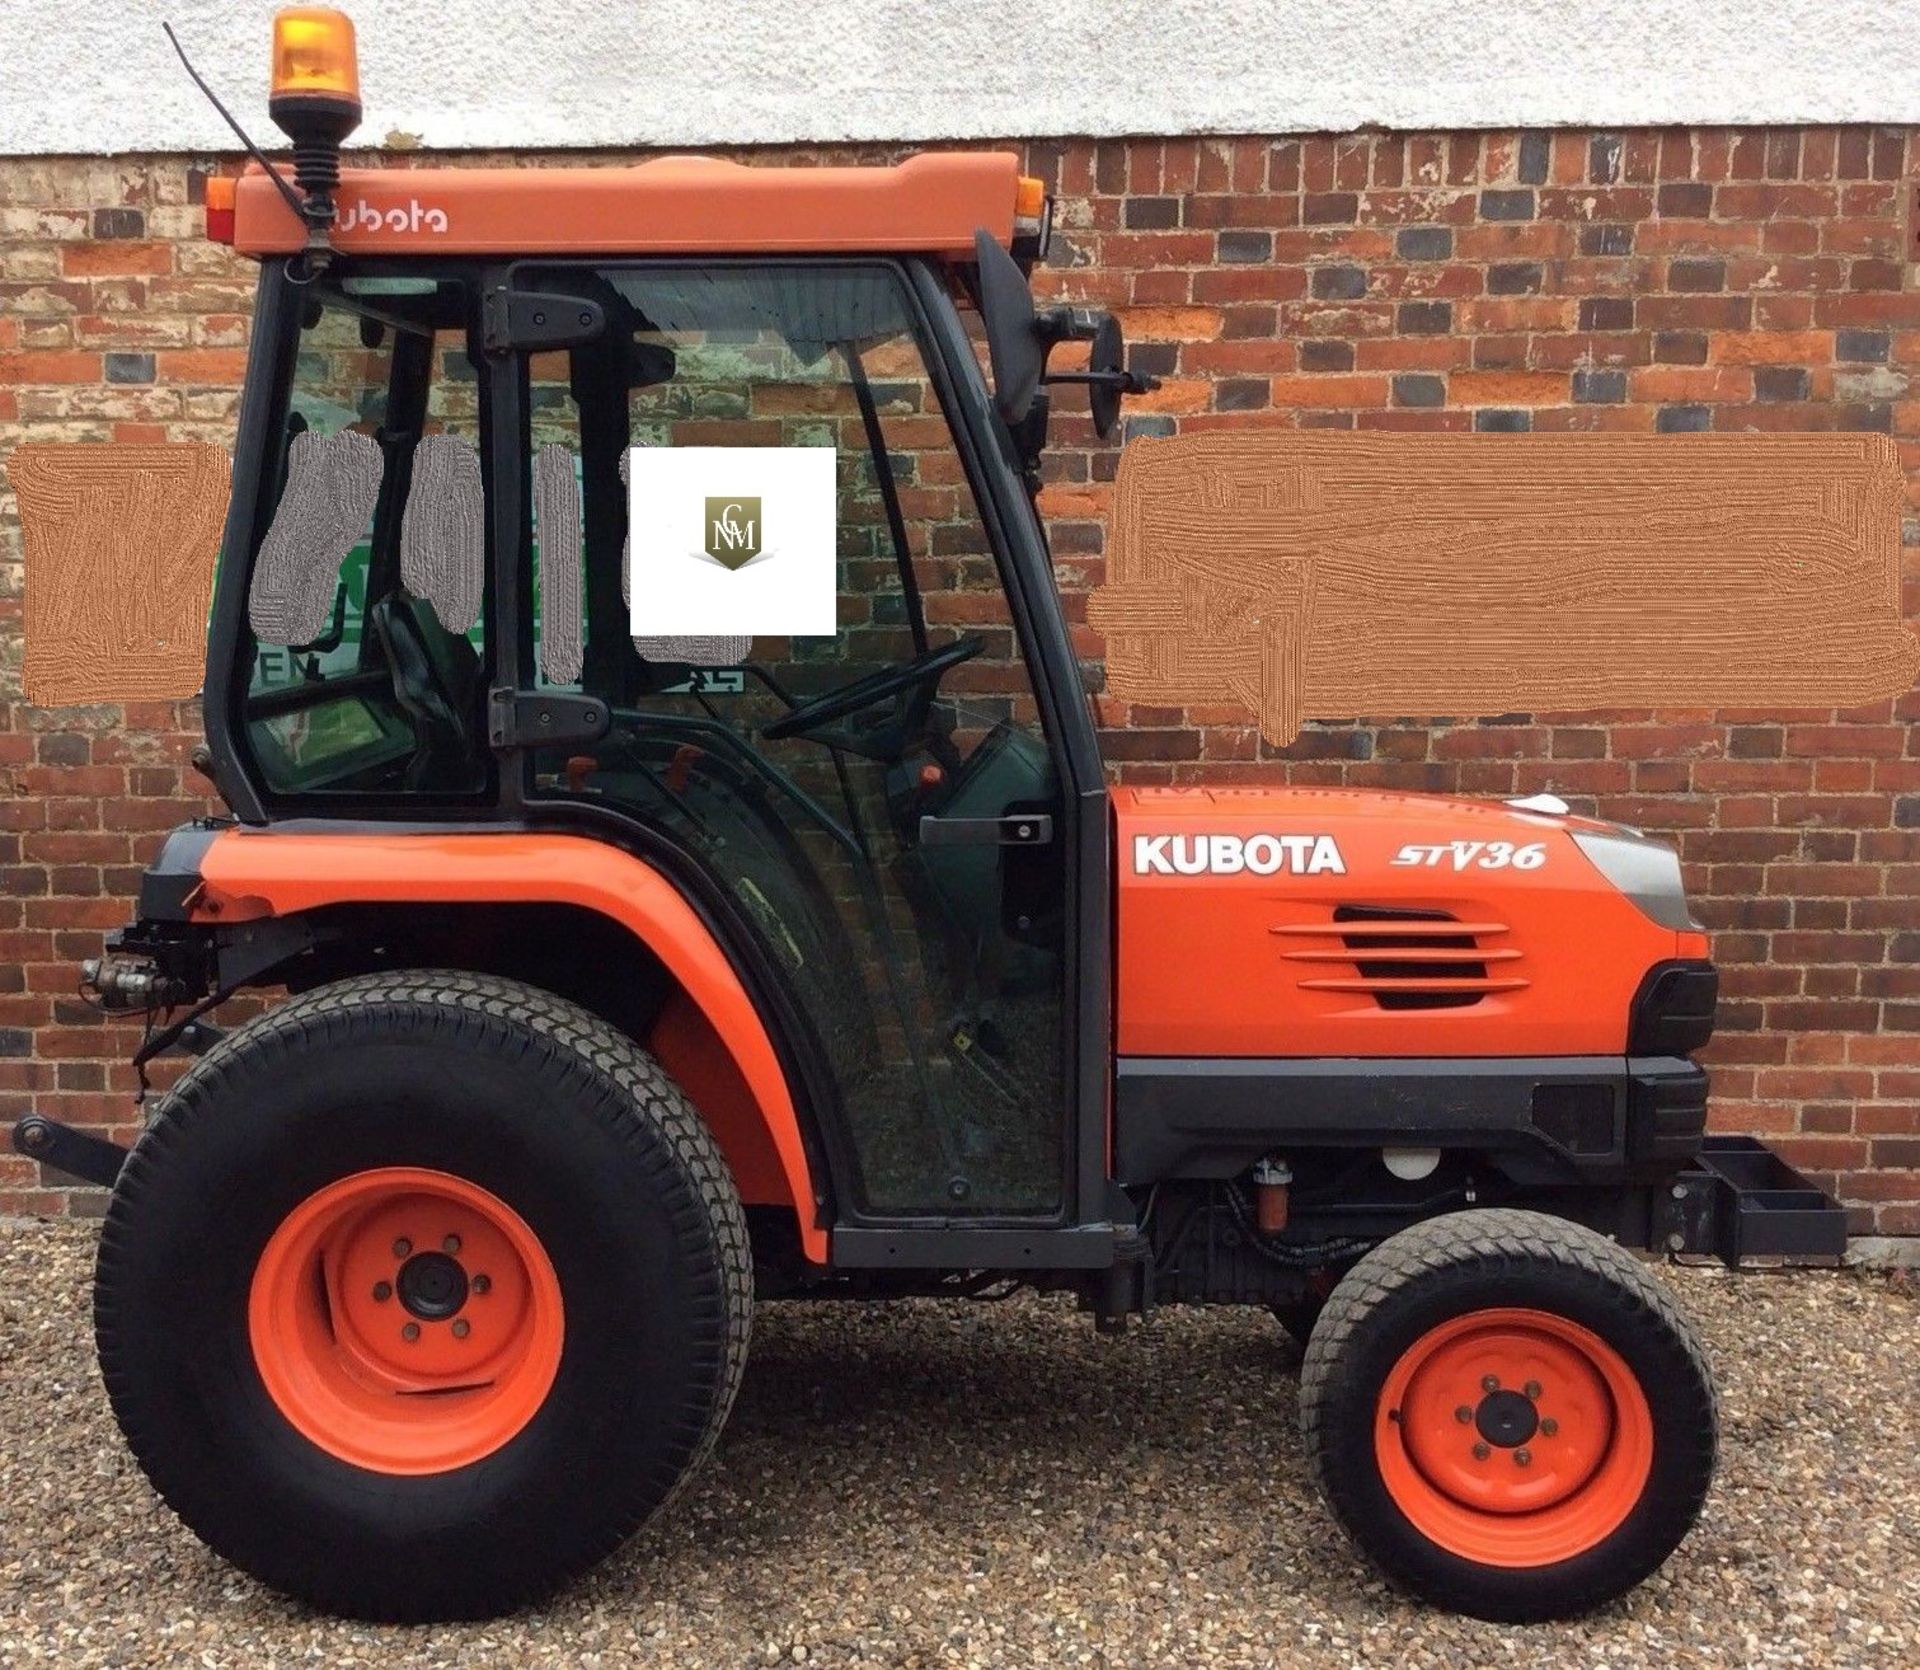 Kubota STV 36 Compact Tractor 4x4 36 Hp Hydrostatic Loader Grass Tyres (441) - Image 2 of 11